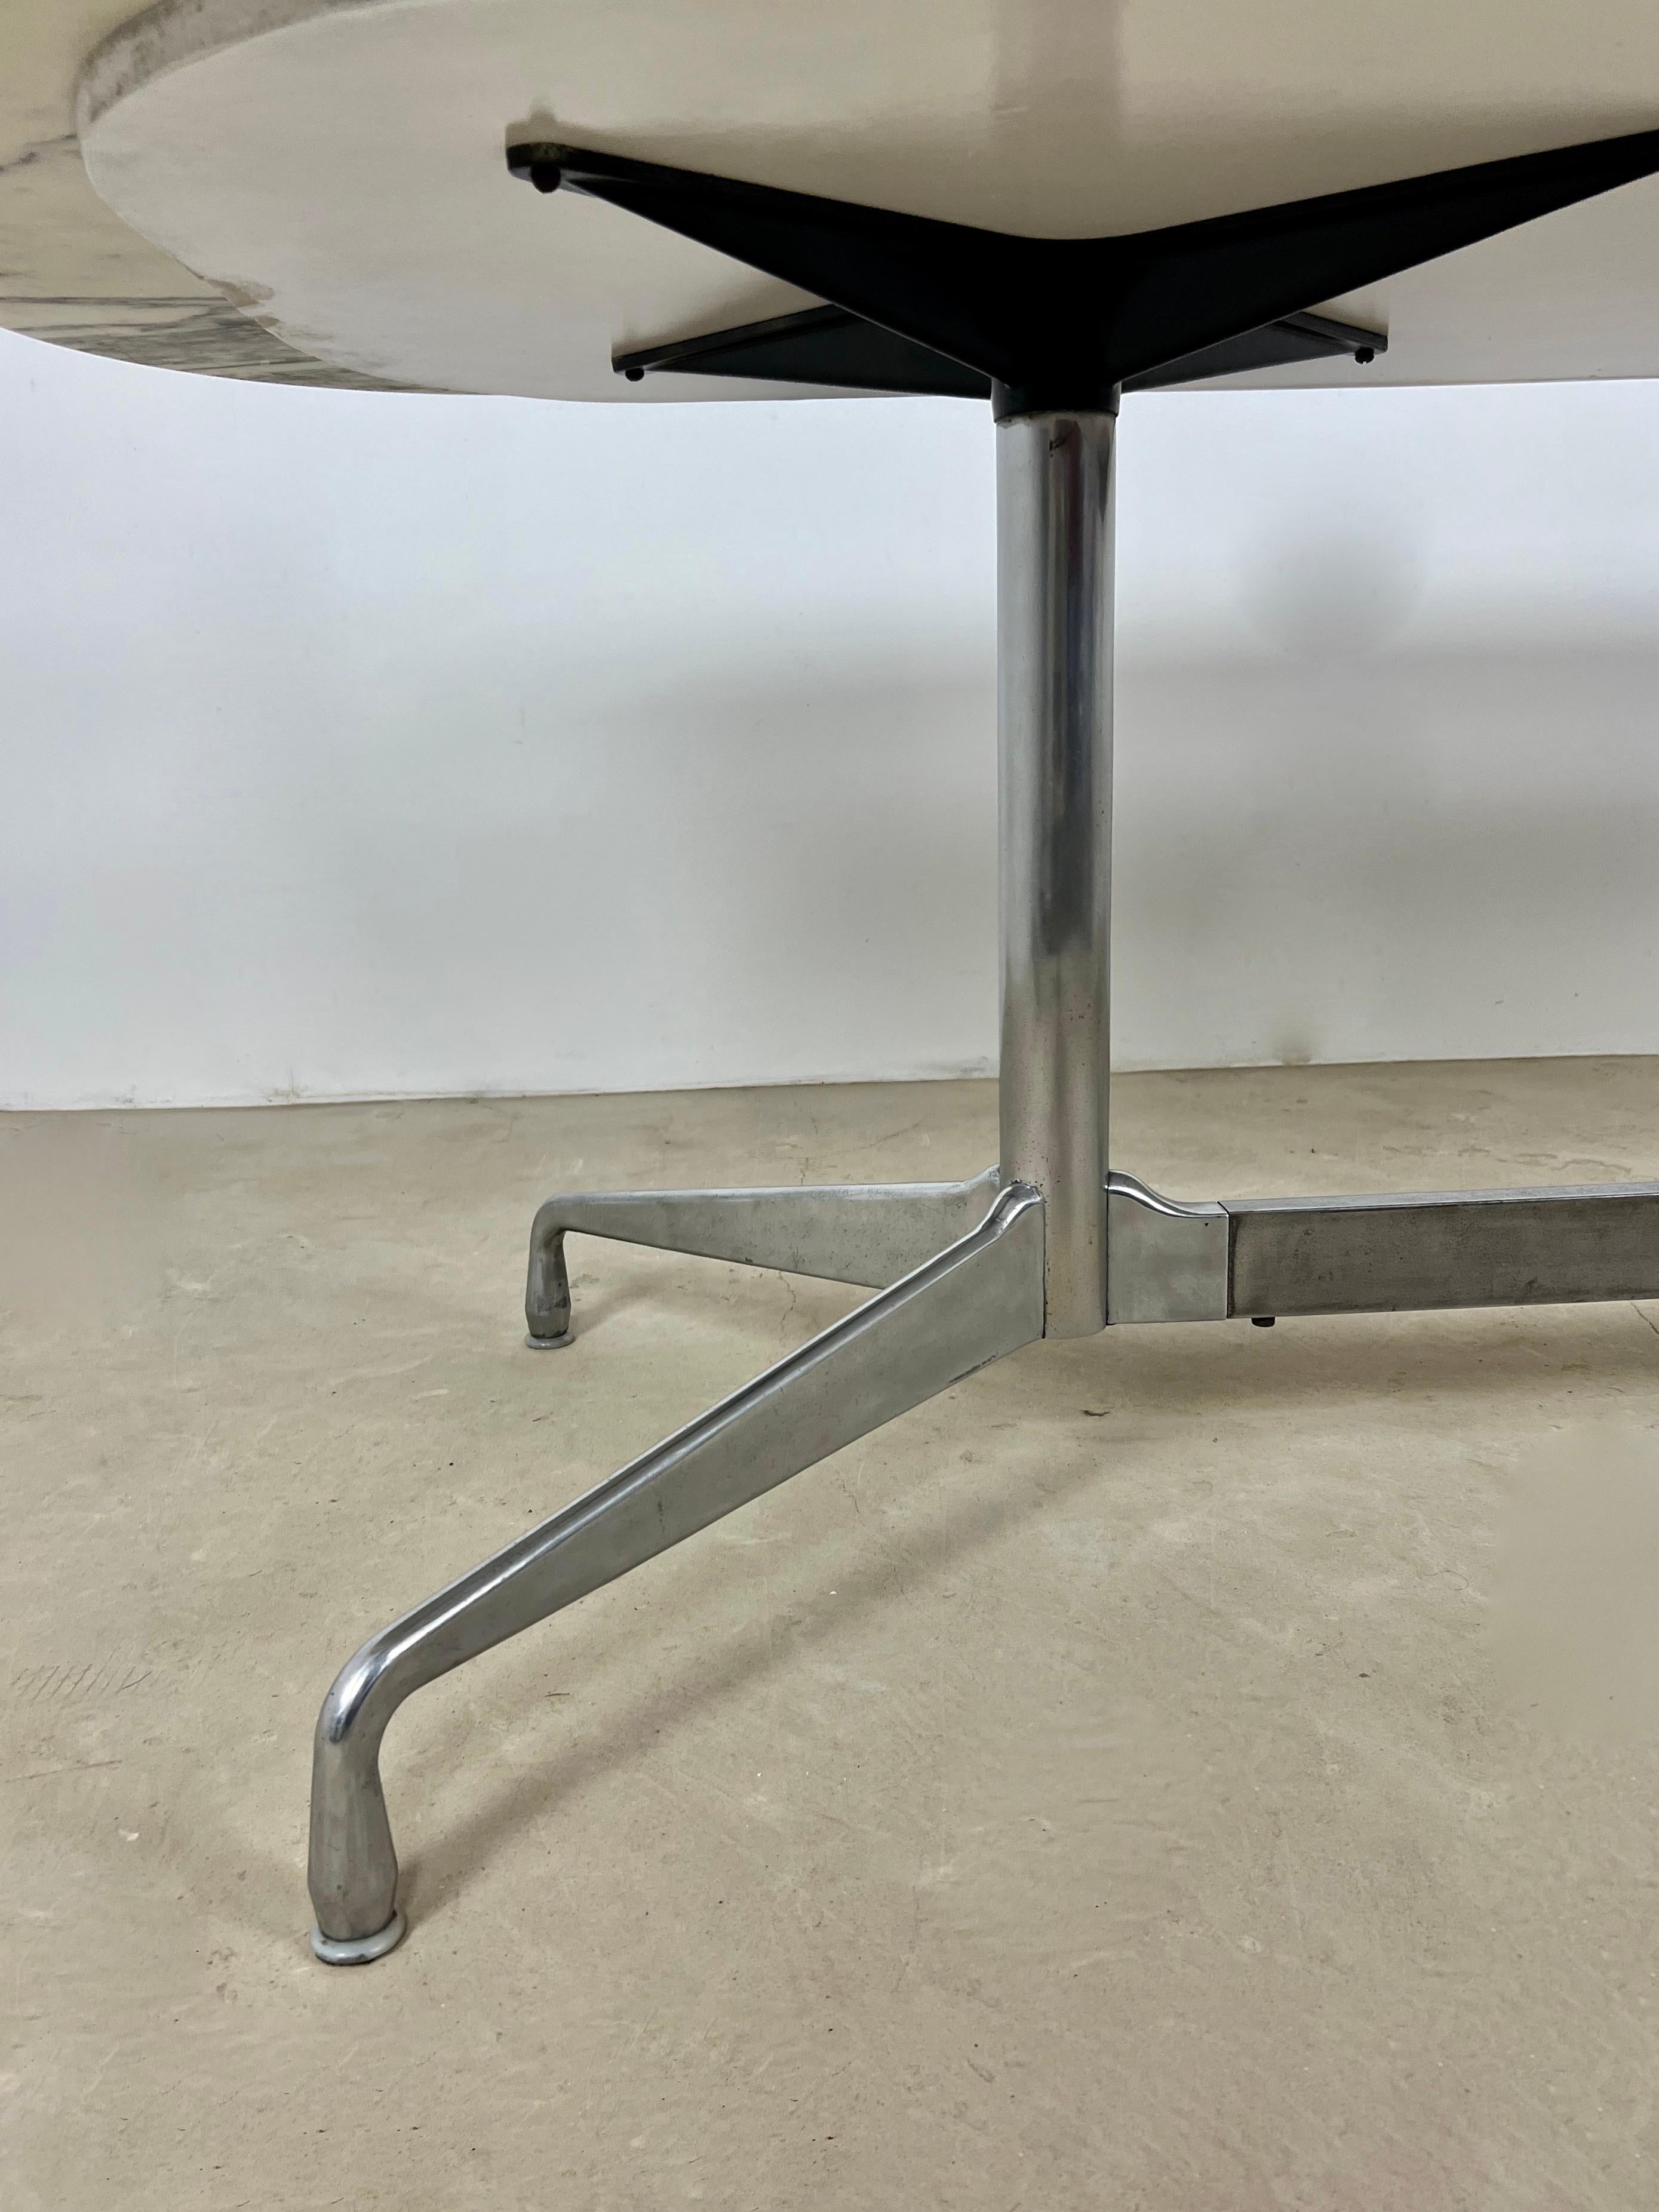 Table in marble and metal. Wear due to time and age of the table (see photo).